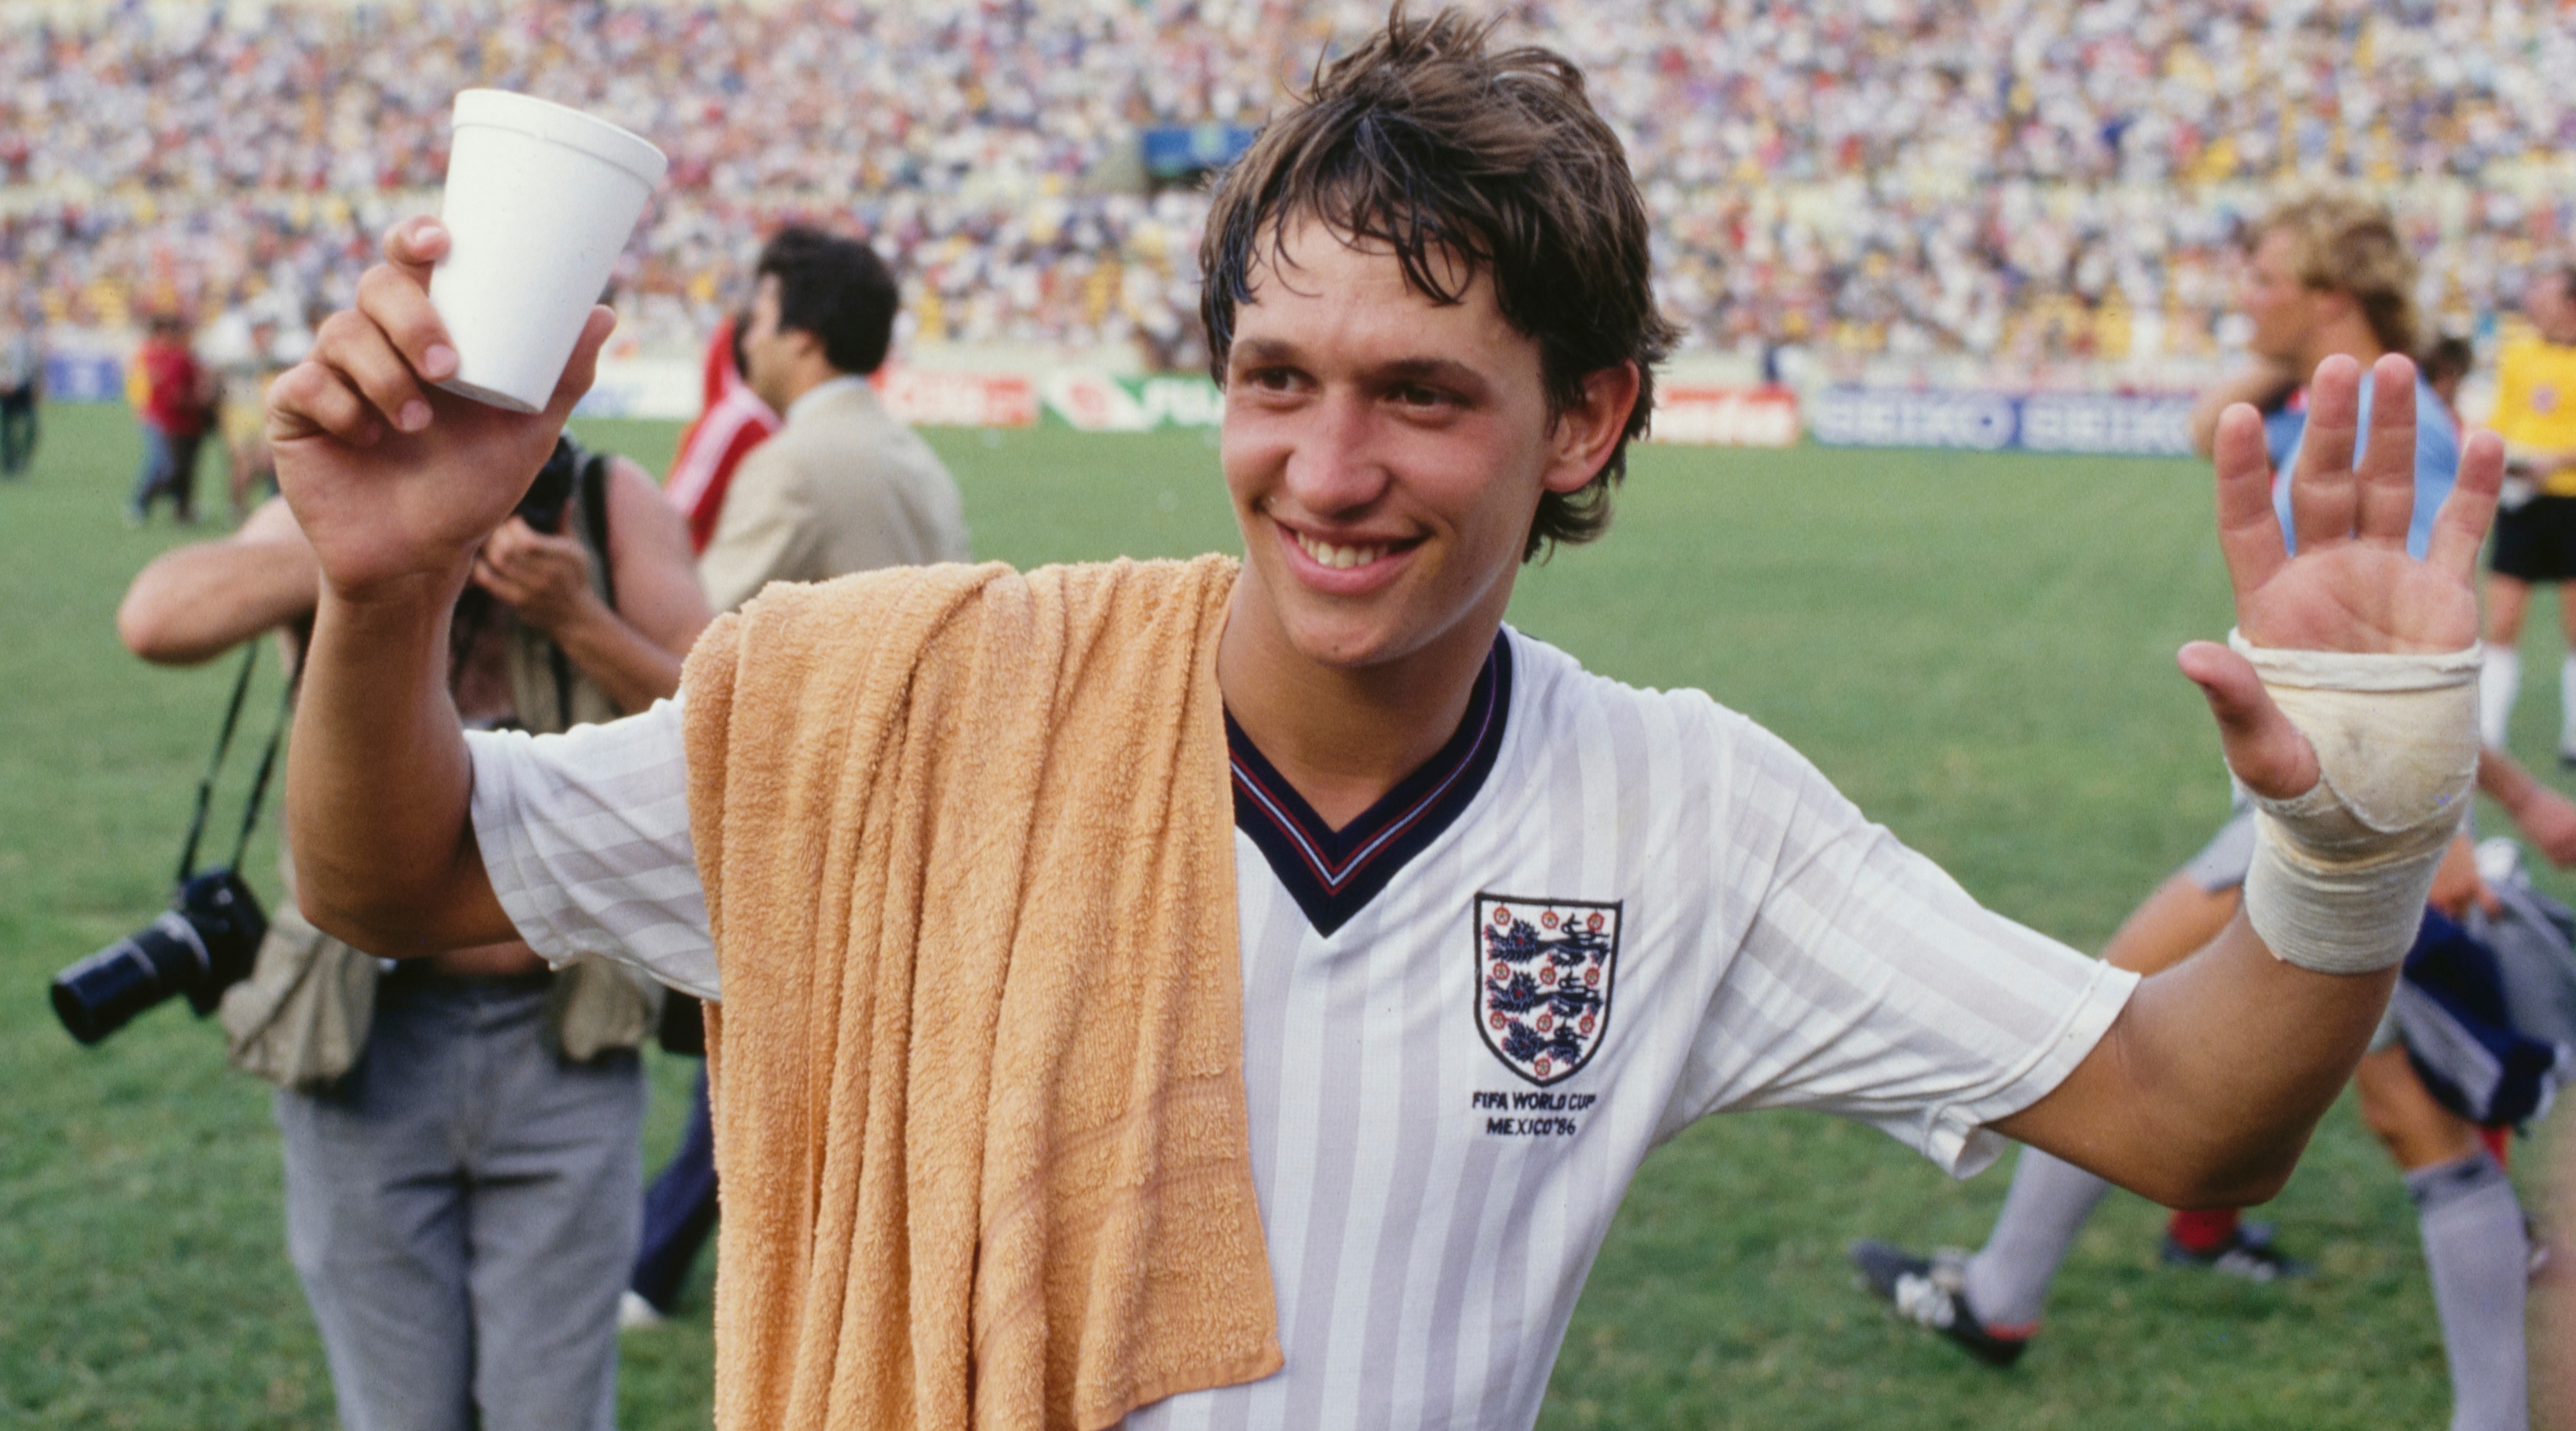 MONTERREY, MEXICO - JUNE 11: Gary Lineker of England celebrates after his hat trick after the FIFA 1986 World Cup match against Poland at the Universitario Stadium on June 11, 1986 in Monterrey, Mexico. England won the match 3-0. (Photo by Mike King/Allsport/Hulton Archive/Getty Images)